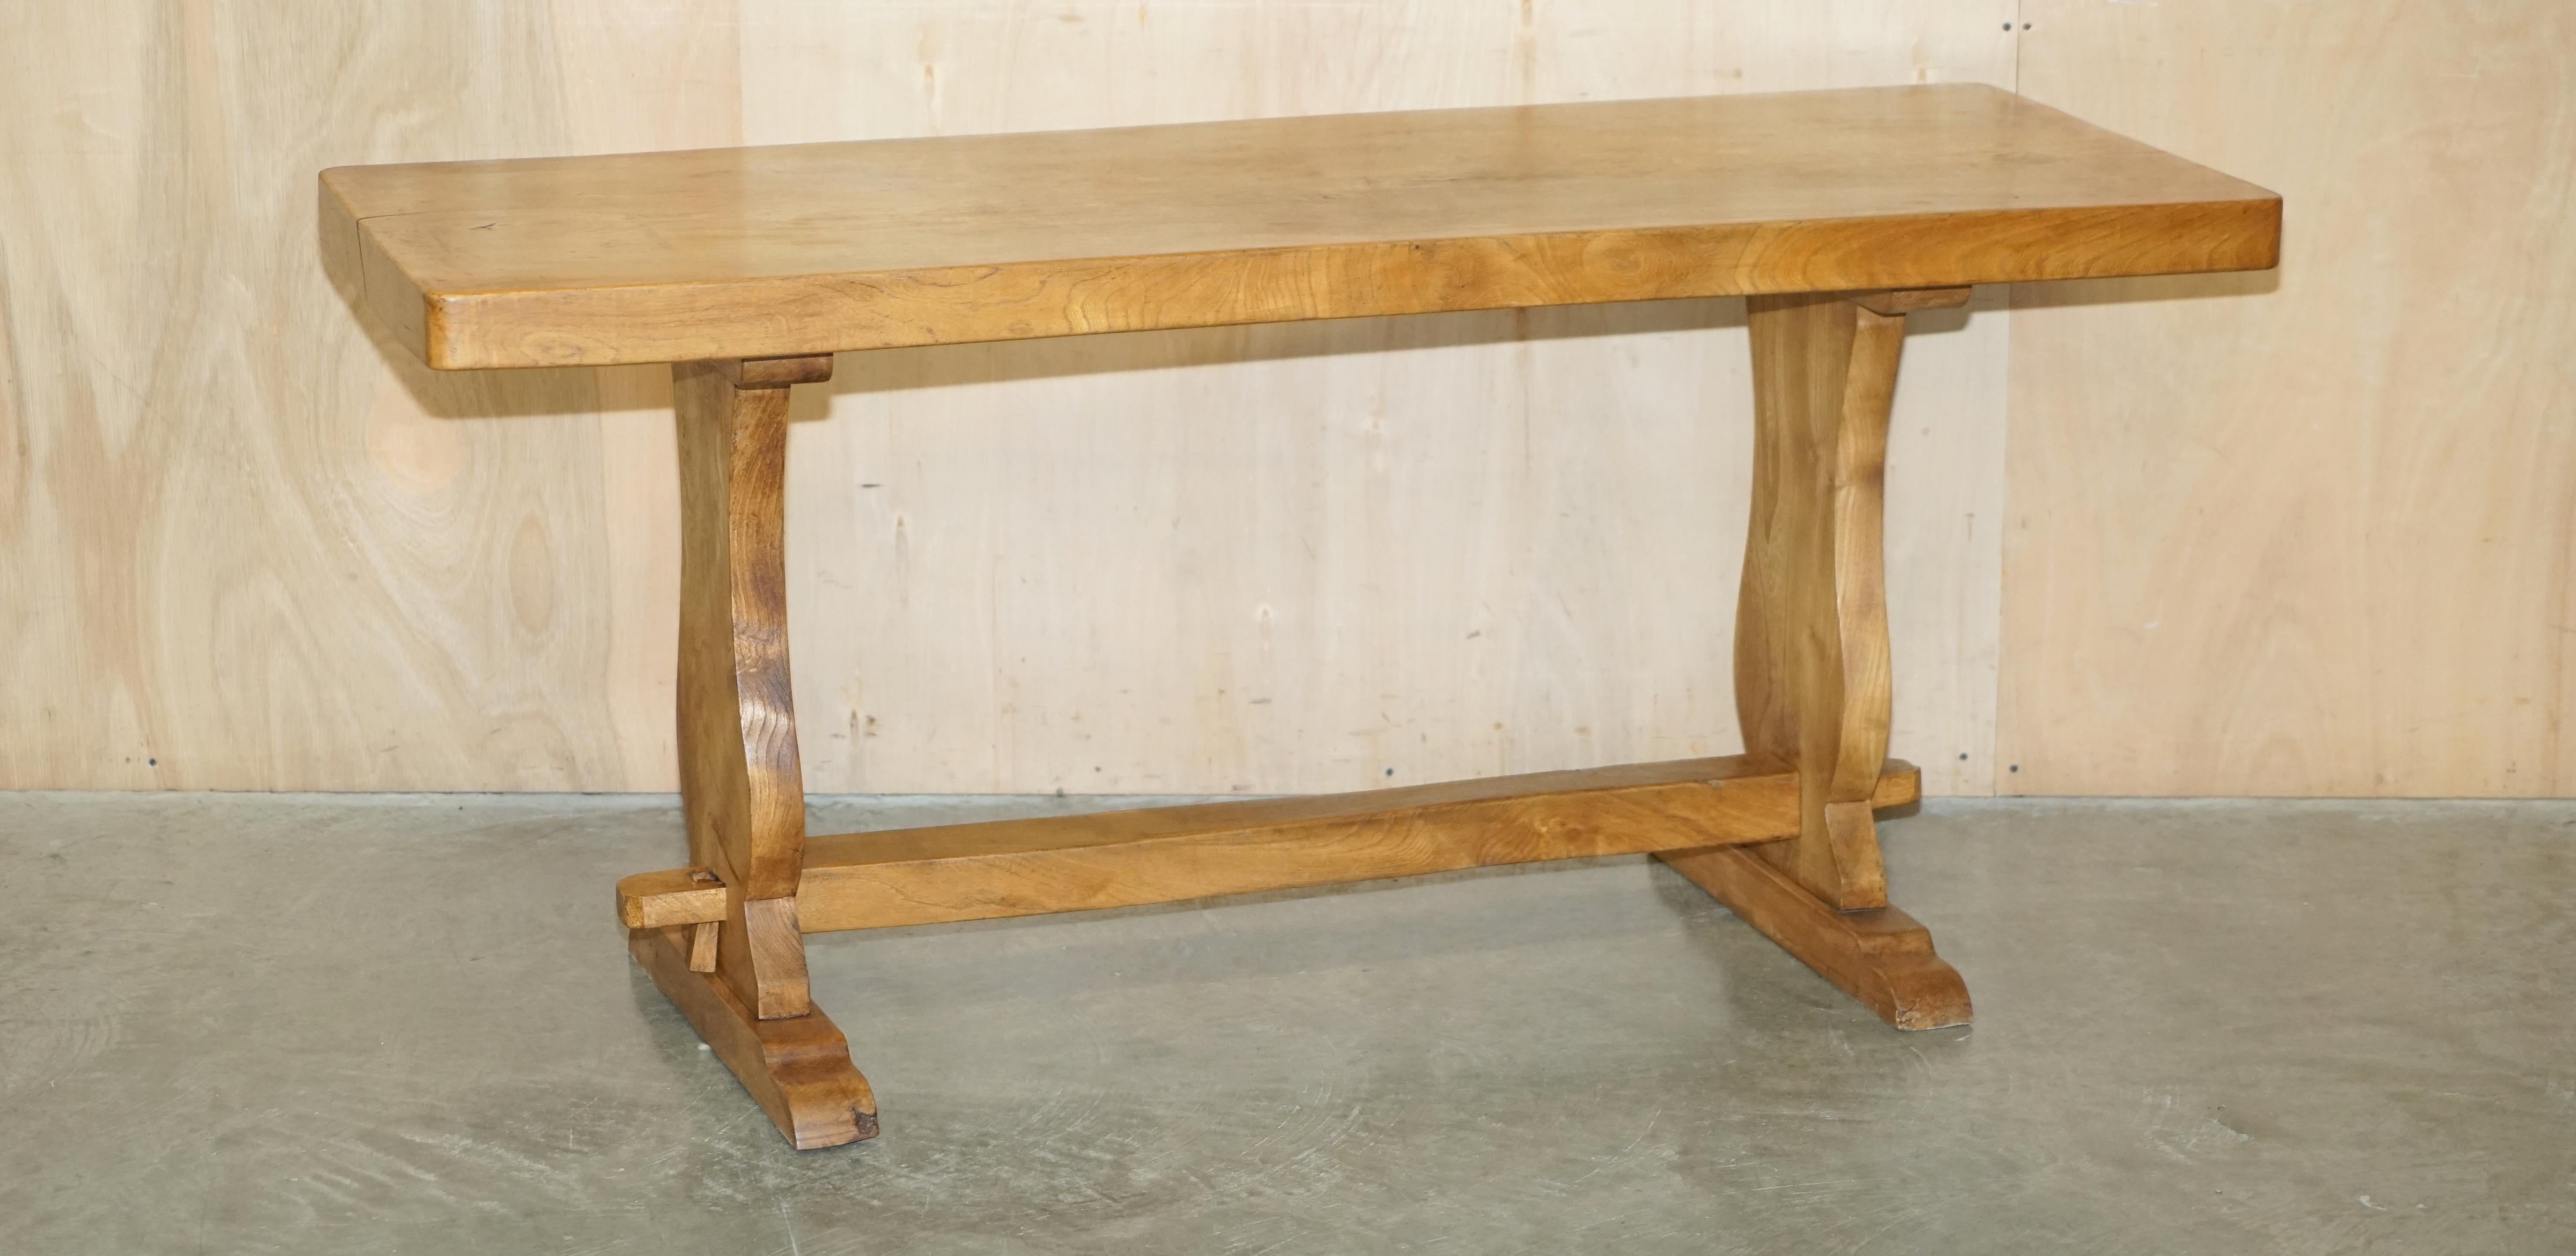 Royal House Antiques

Royal House Antiques is delighted to offer for sale this very desirable farmhouse country refectory dining table with the super rare, one plank, burr oak top 

Please note the delivery fee listed is just a guide, it covers